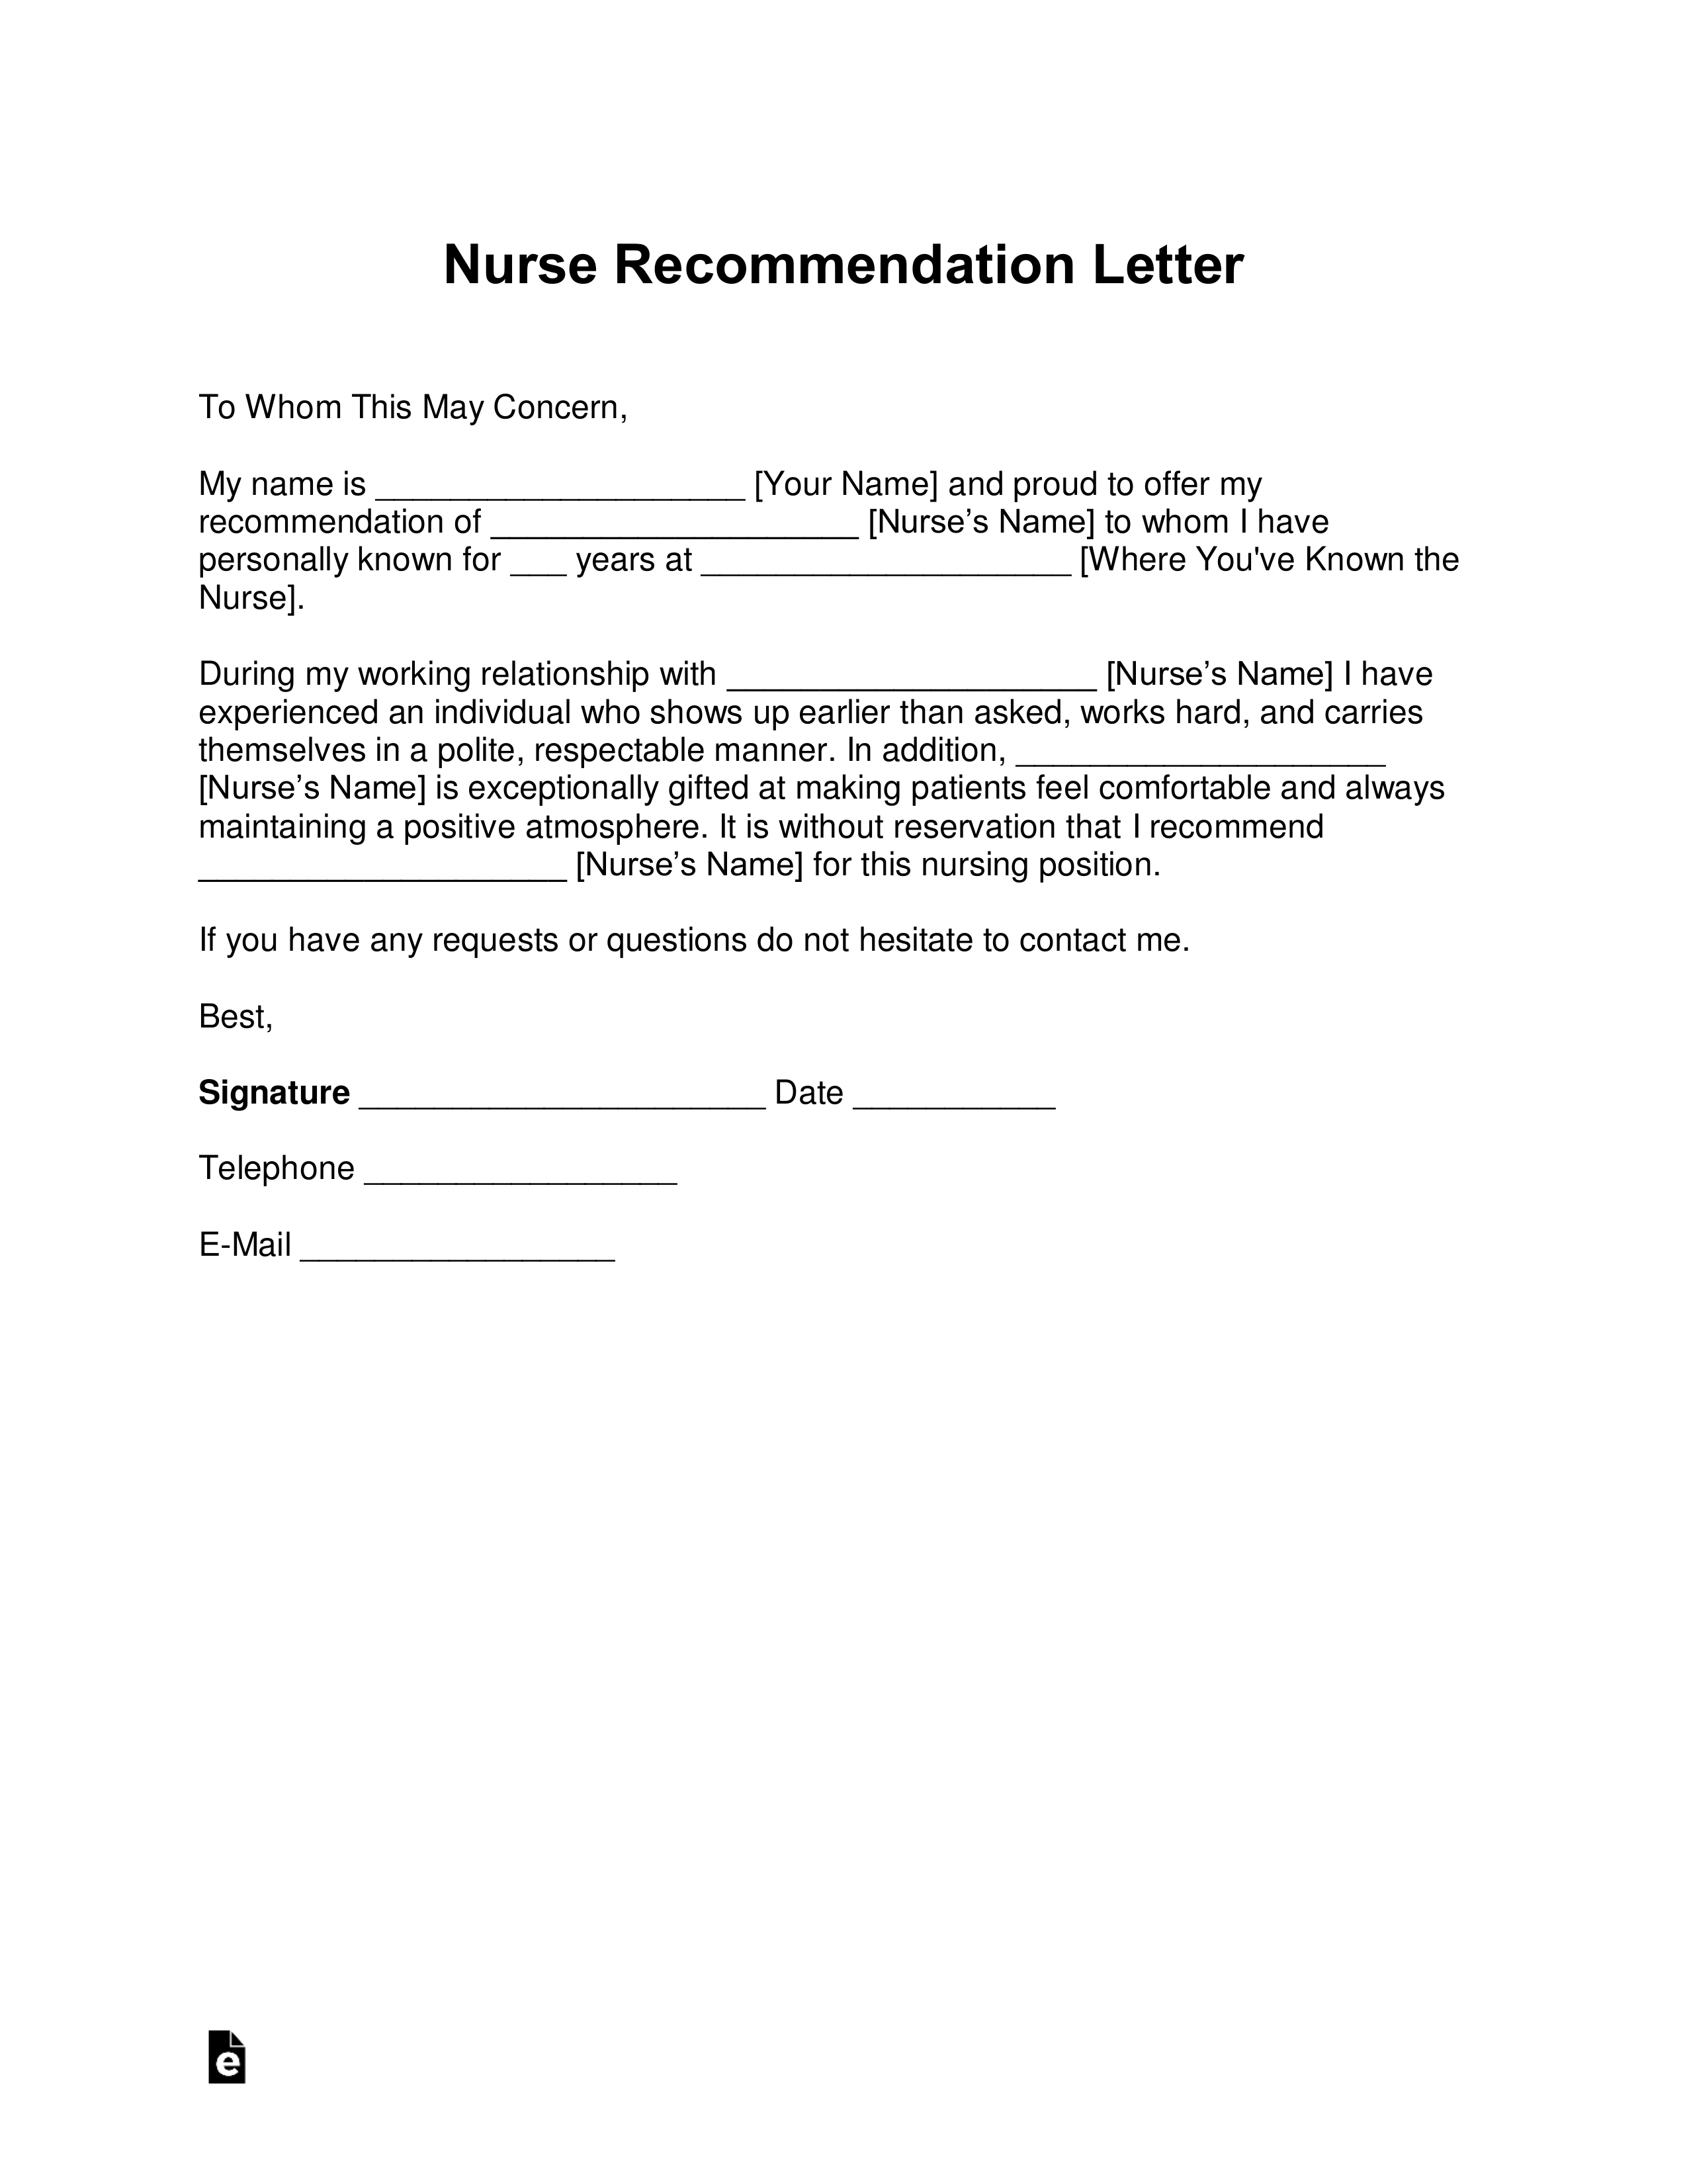 free registered nurse rn letter of recommendation template simple samples of testimony and deeds